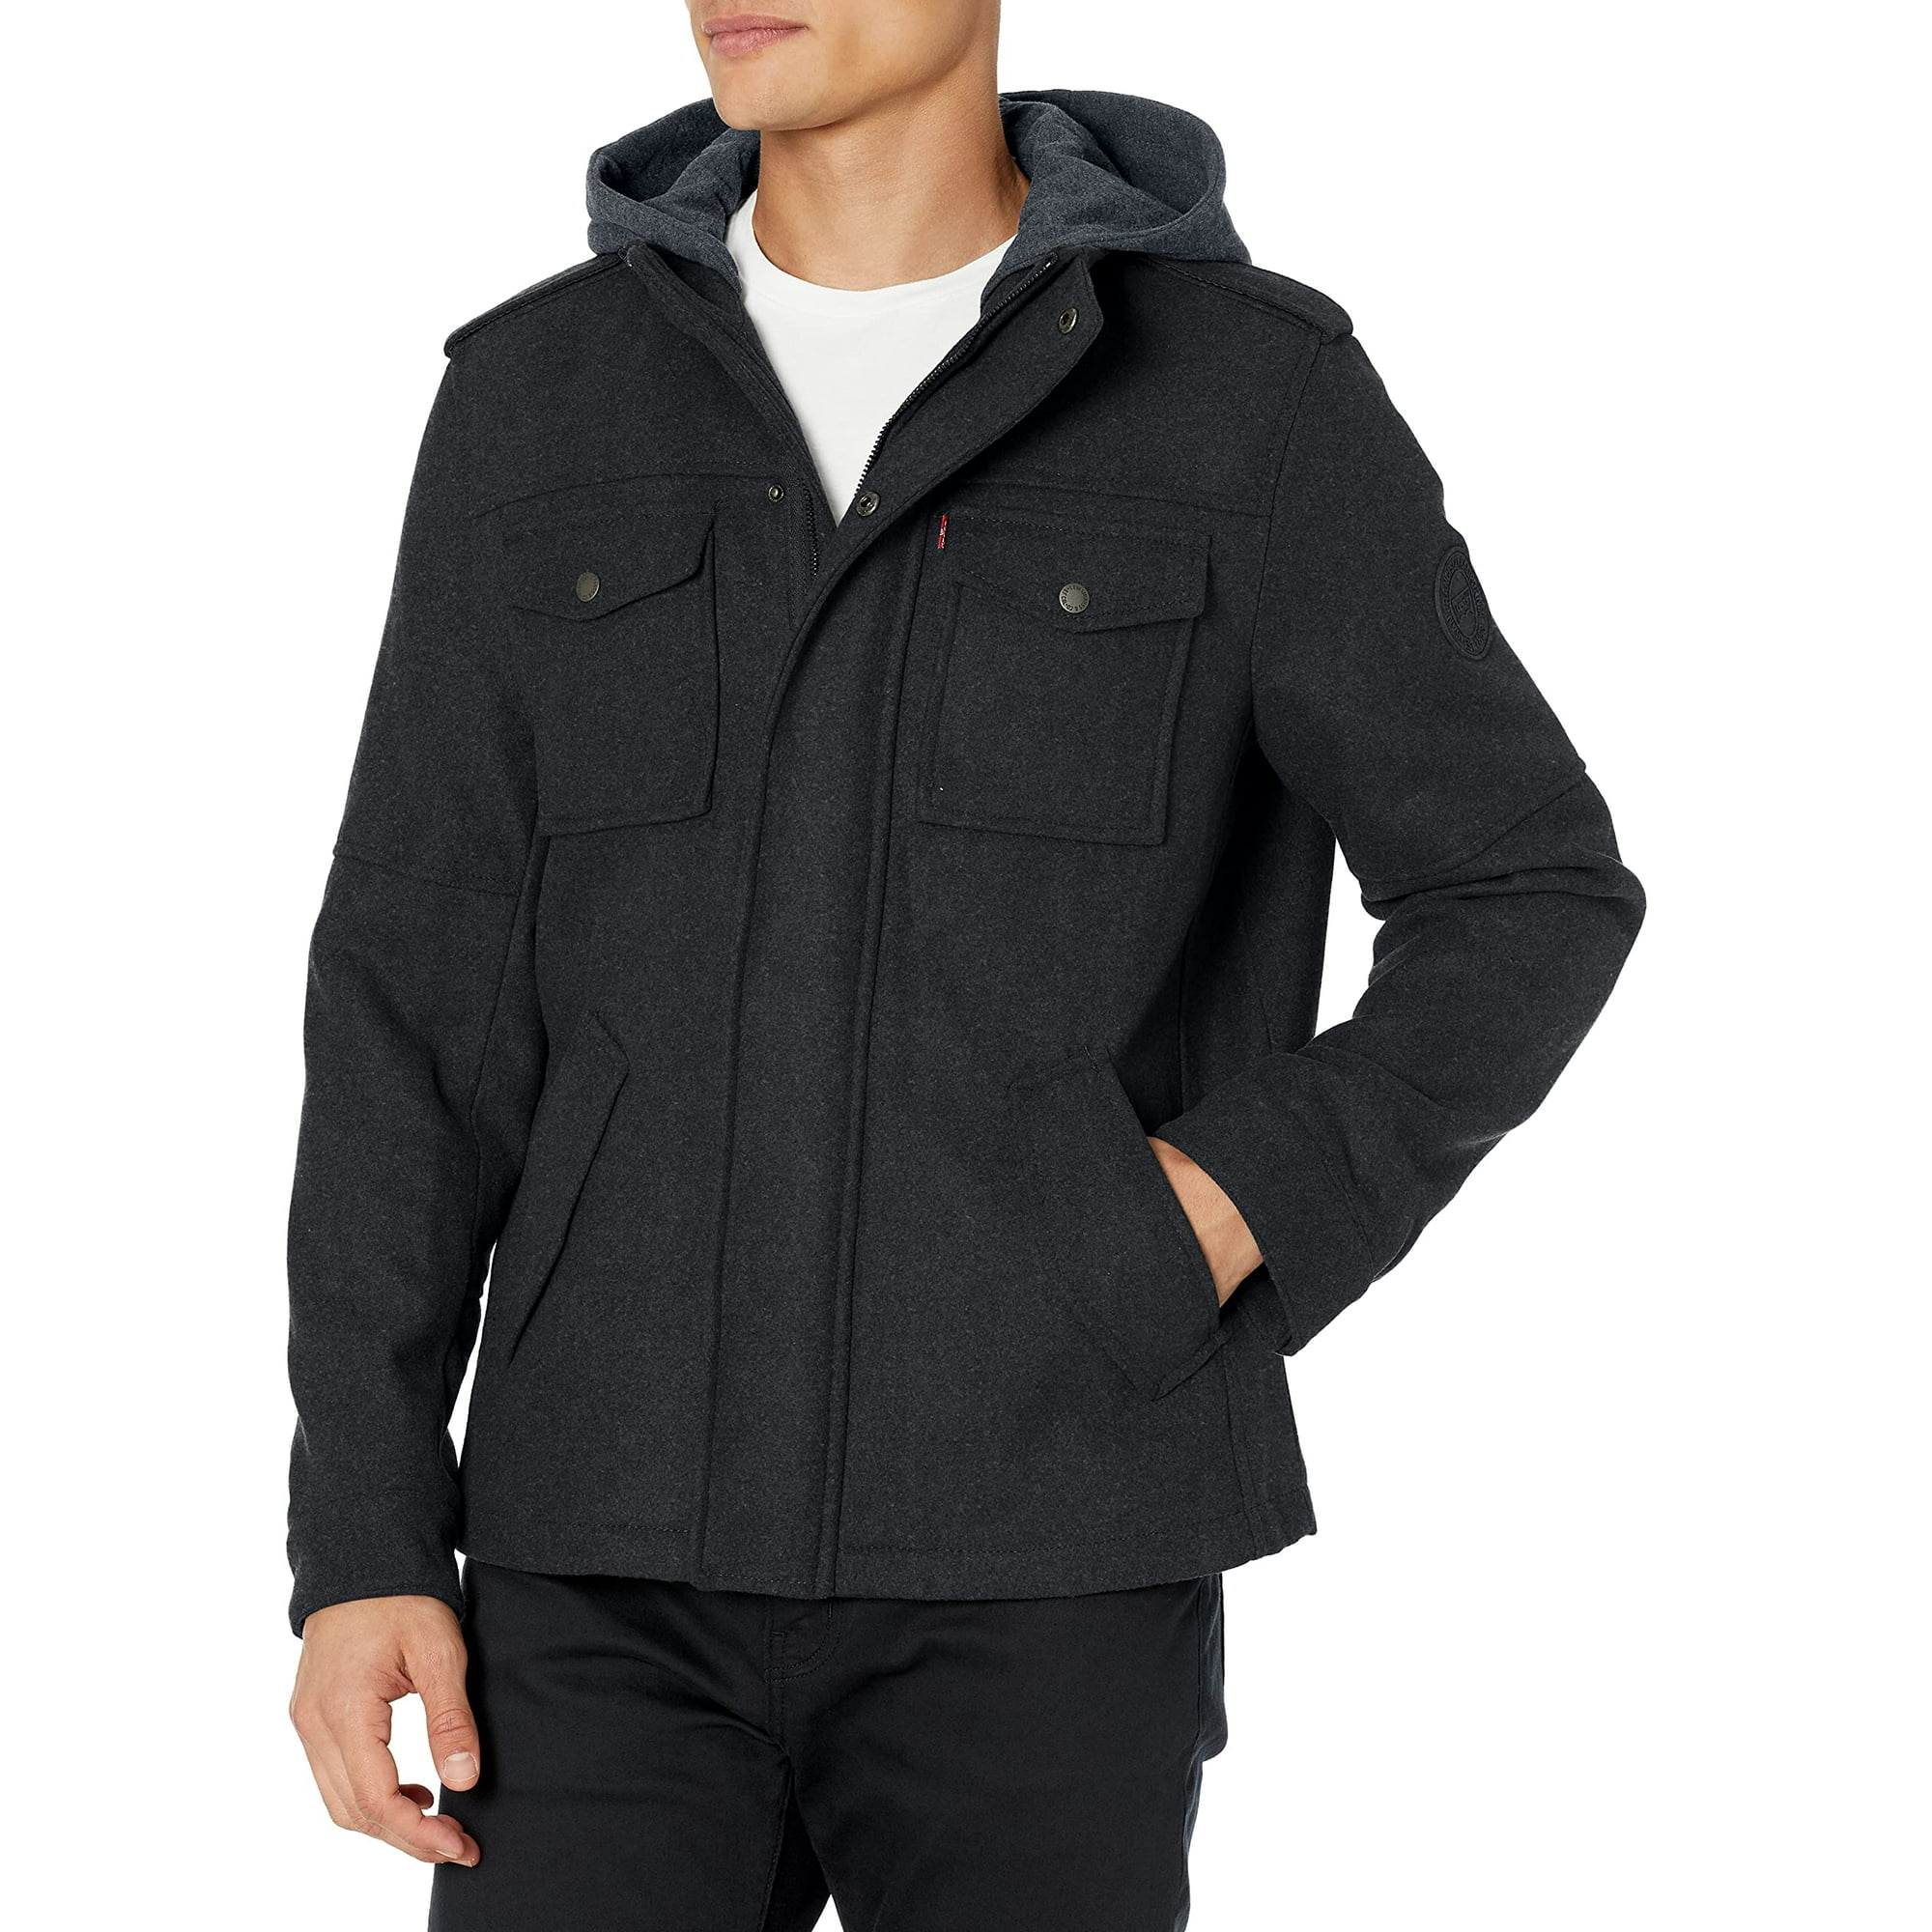 Levi's Men's Big and Tall Wool Blend Military Jacket with Hood, Charcoal,  LT | Walmart Canada